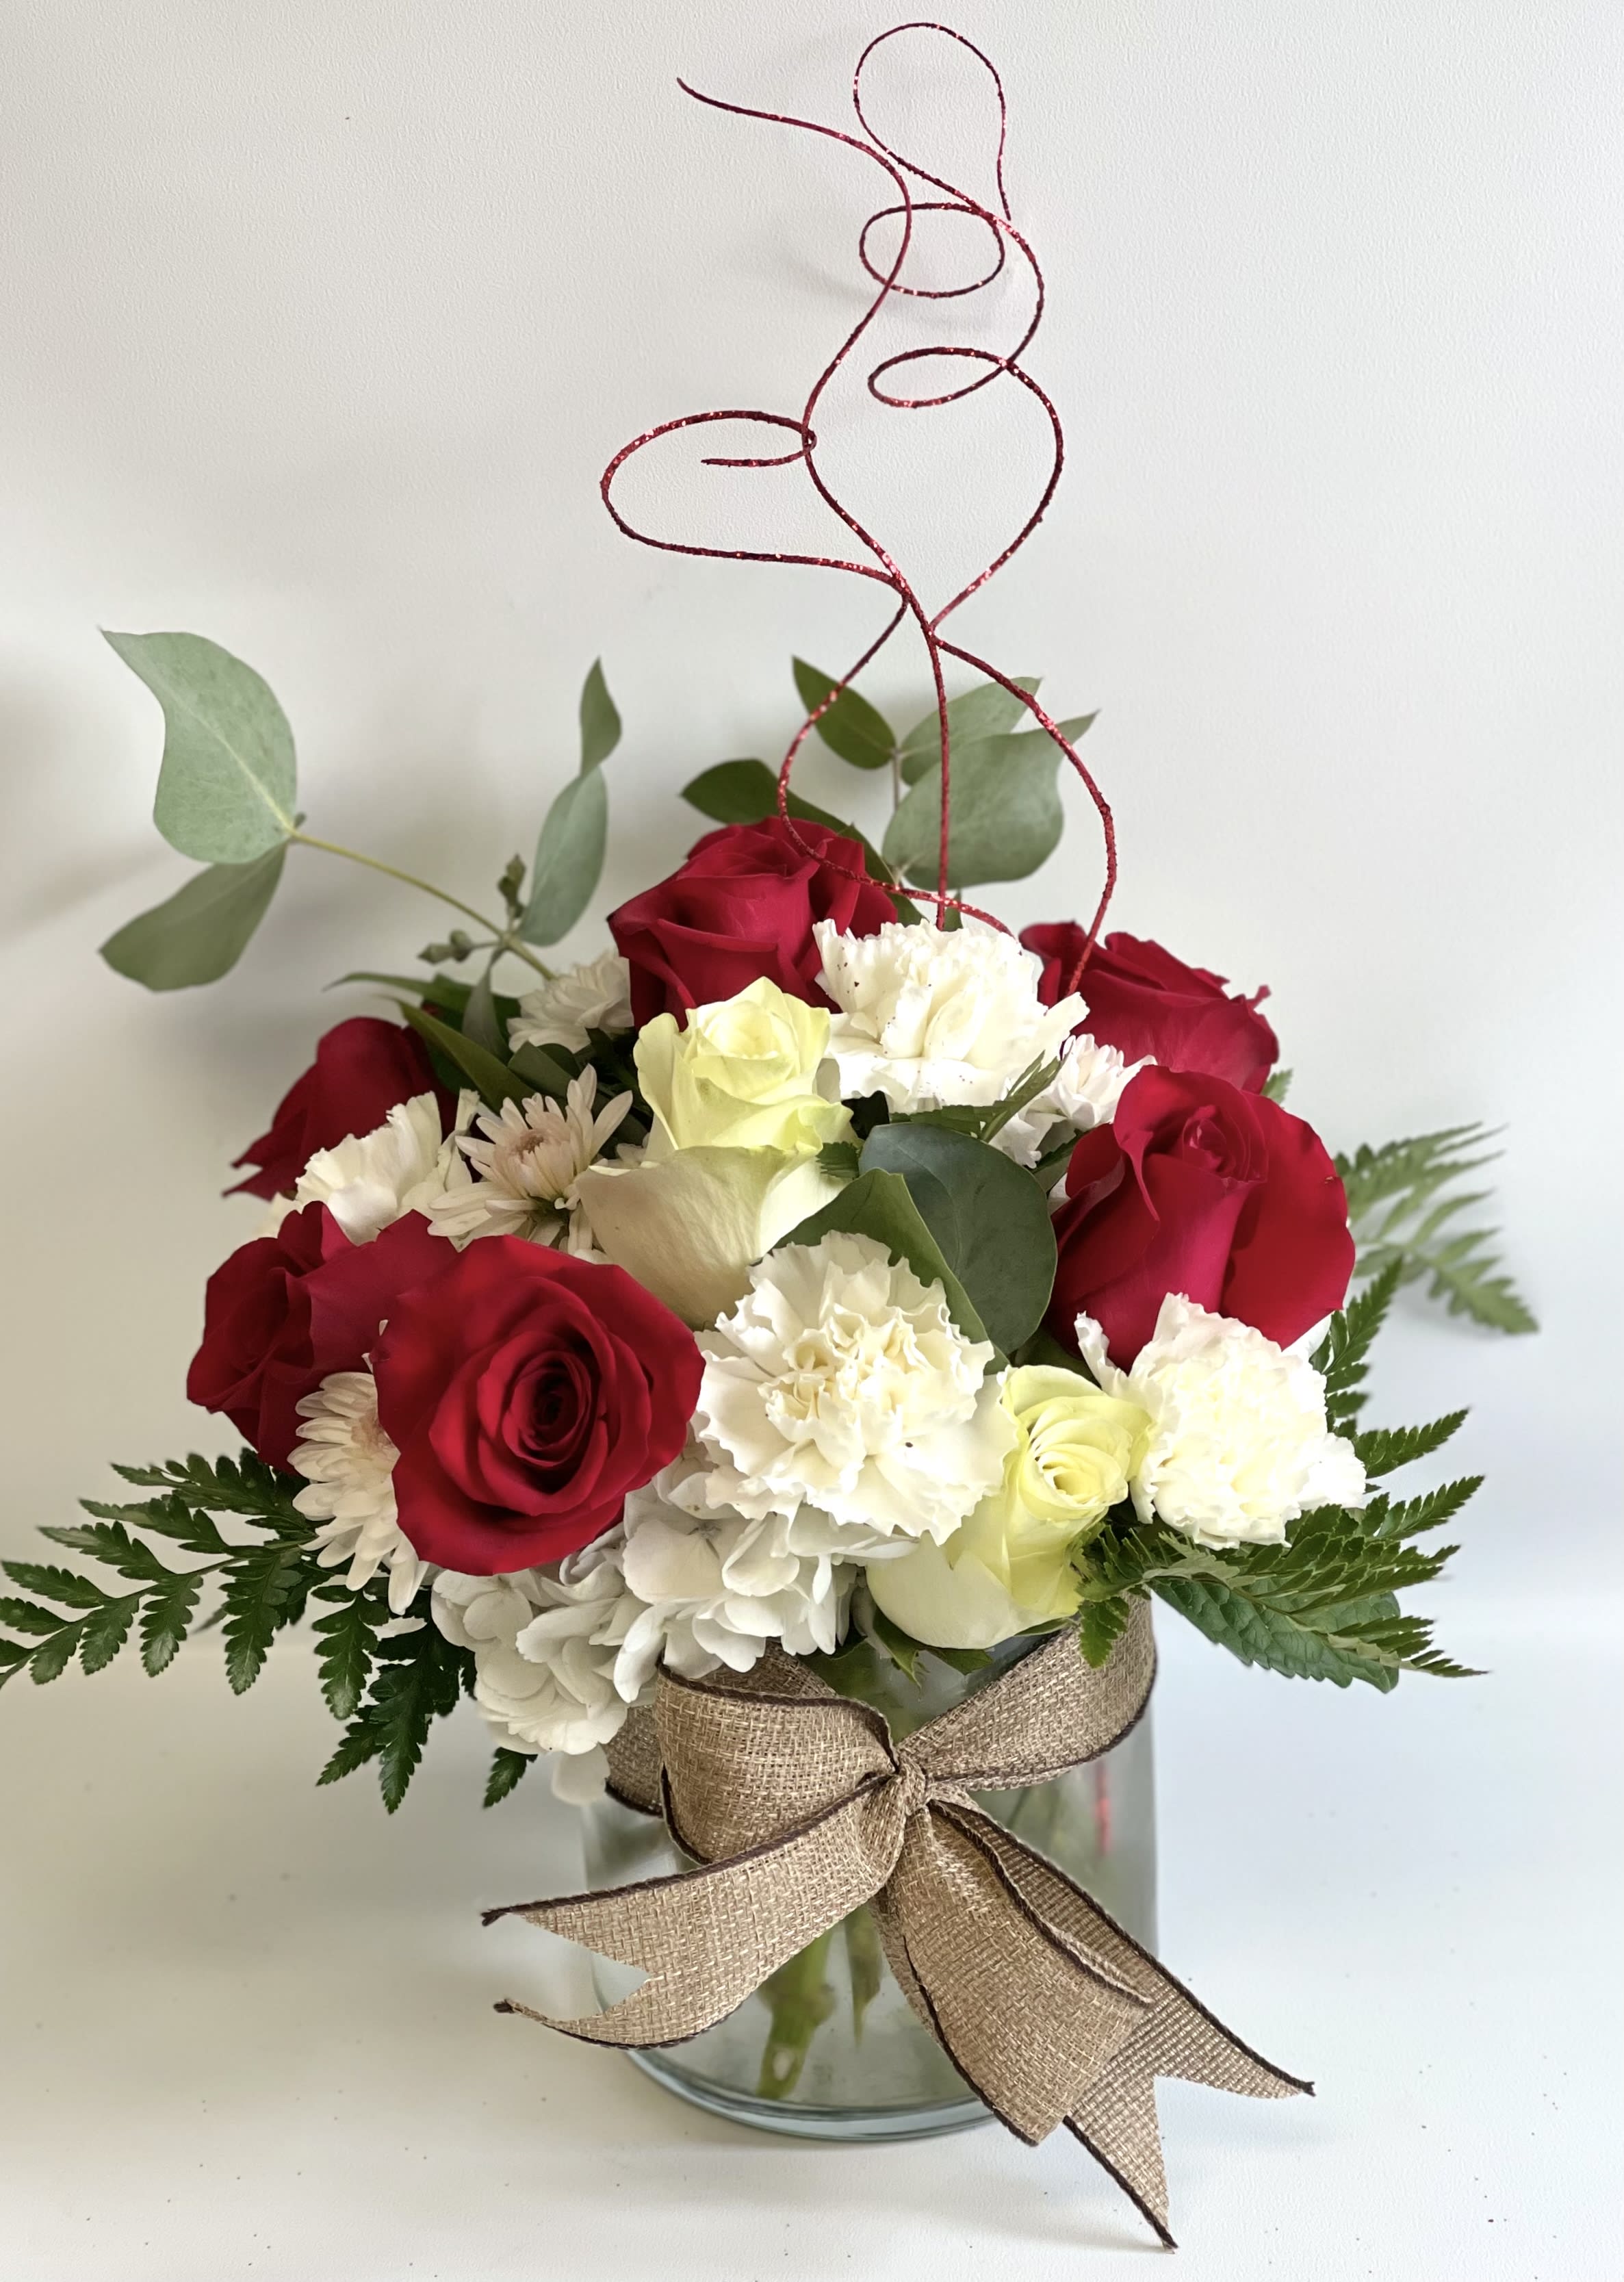 Sweetheart by Barb’s Flowers - This sweet bouquet is done up in a large glass cylinder with hydrangea, roses, carnations, and other flowers.  